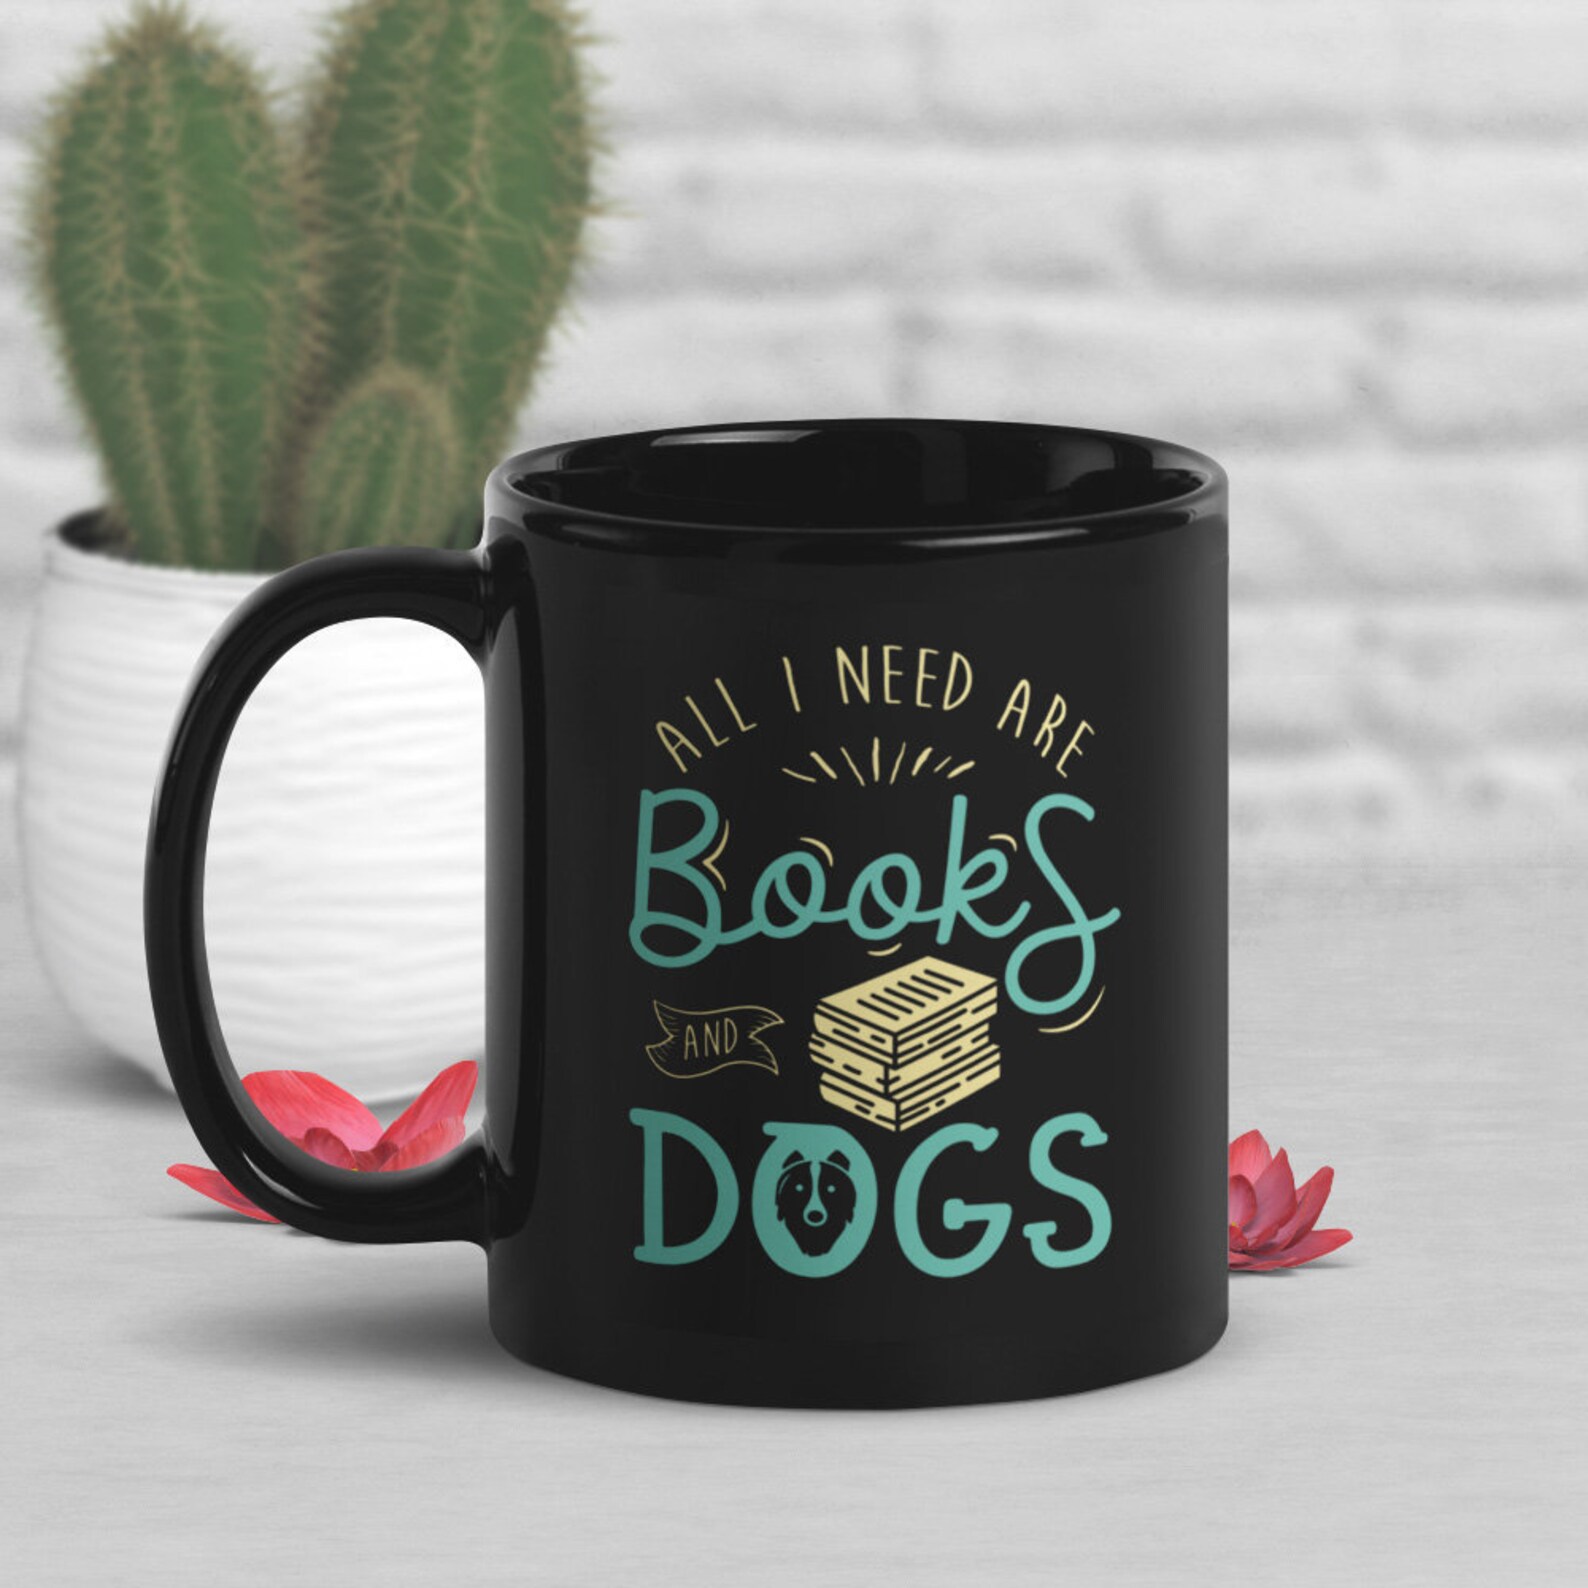 a photo of a black mug that says, "All I need is books and dogs."